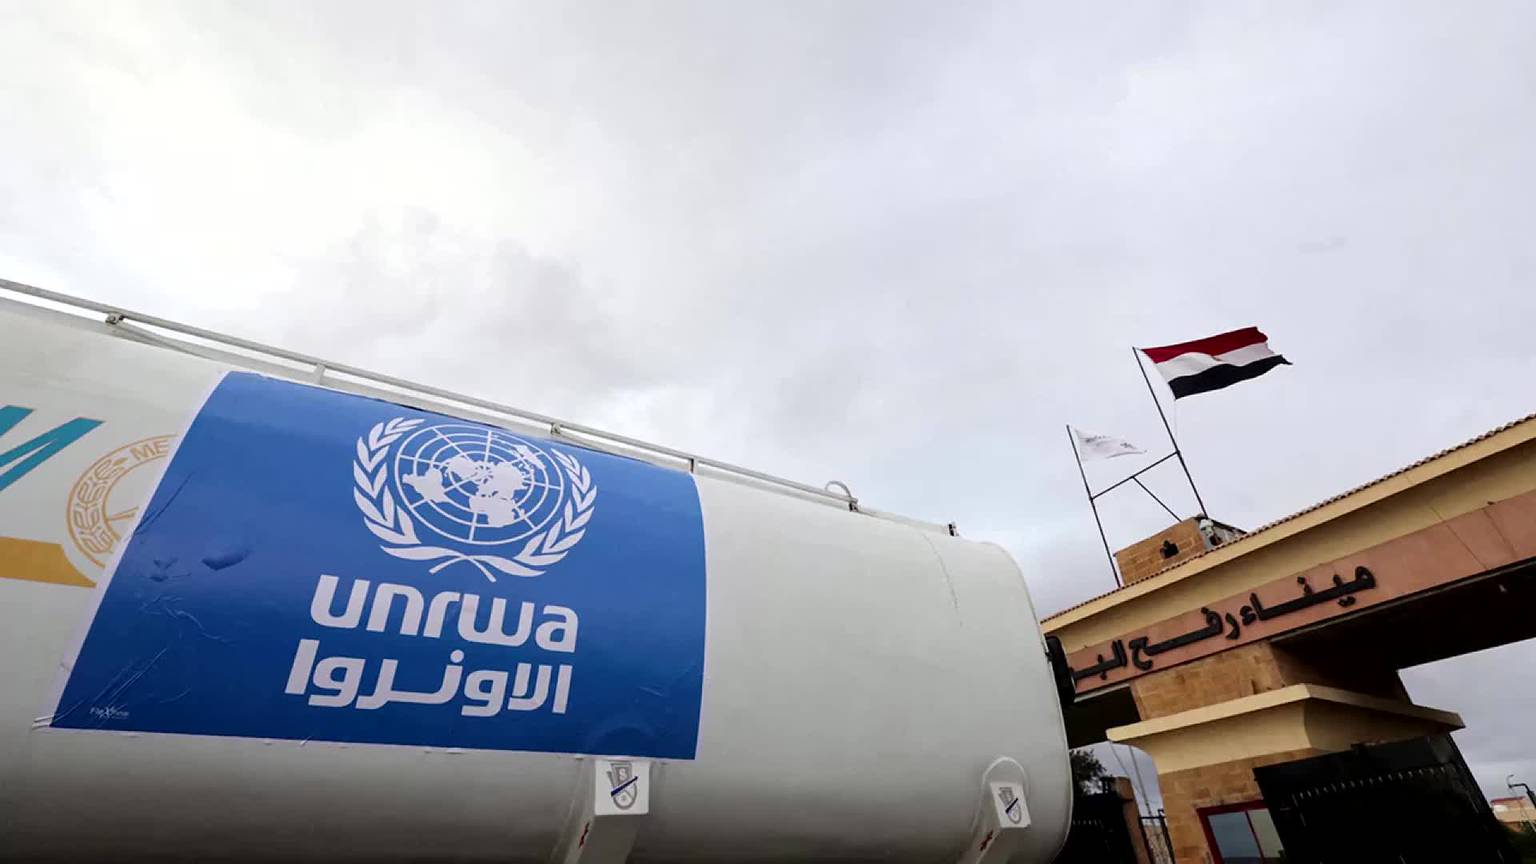 Video: No evidence from Israel for some UNRWA claims, review says [Video]